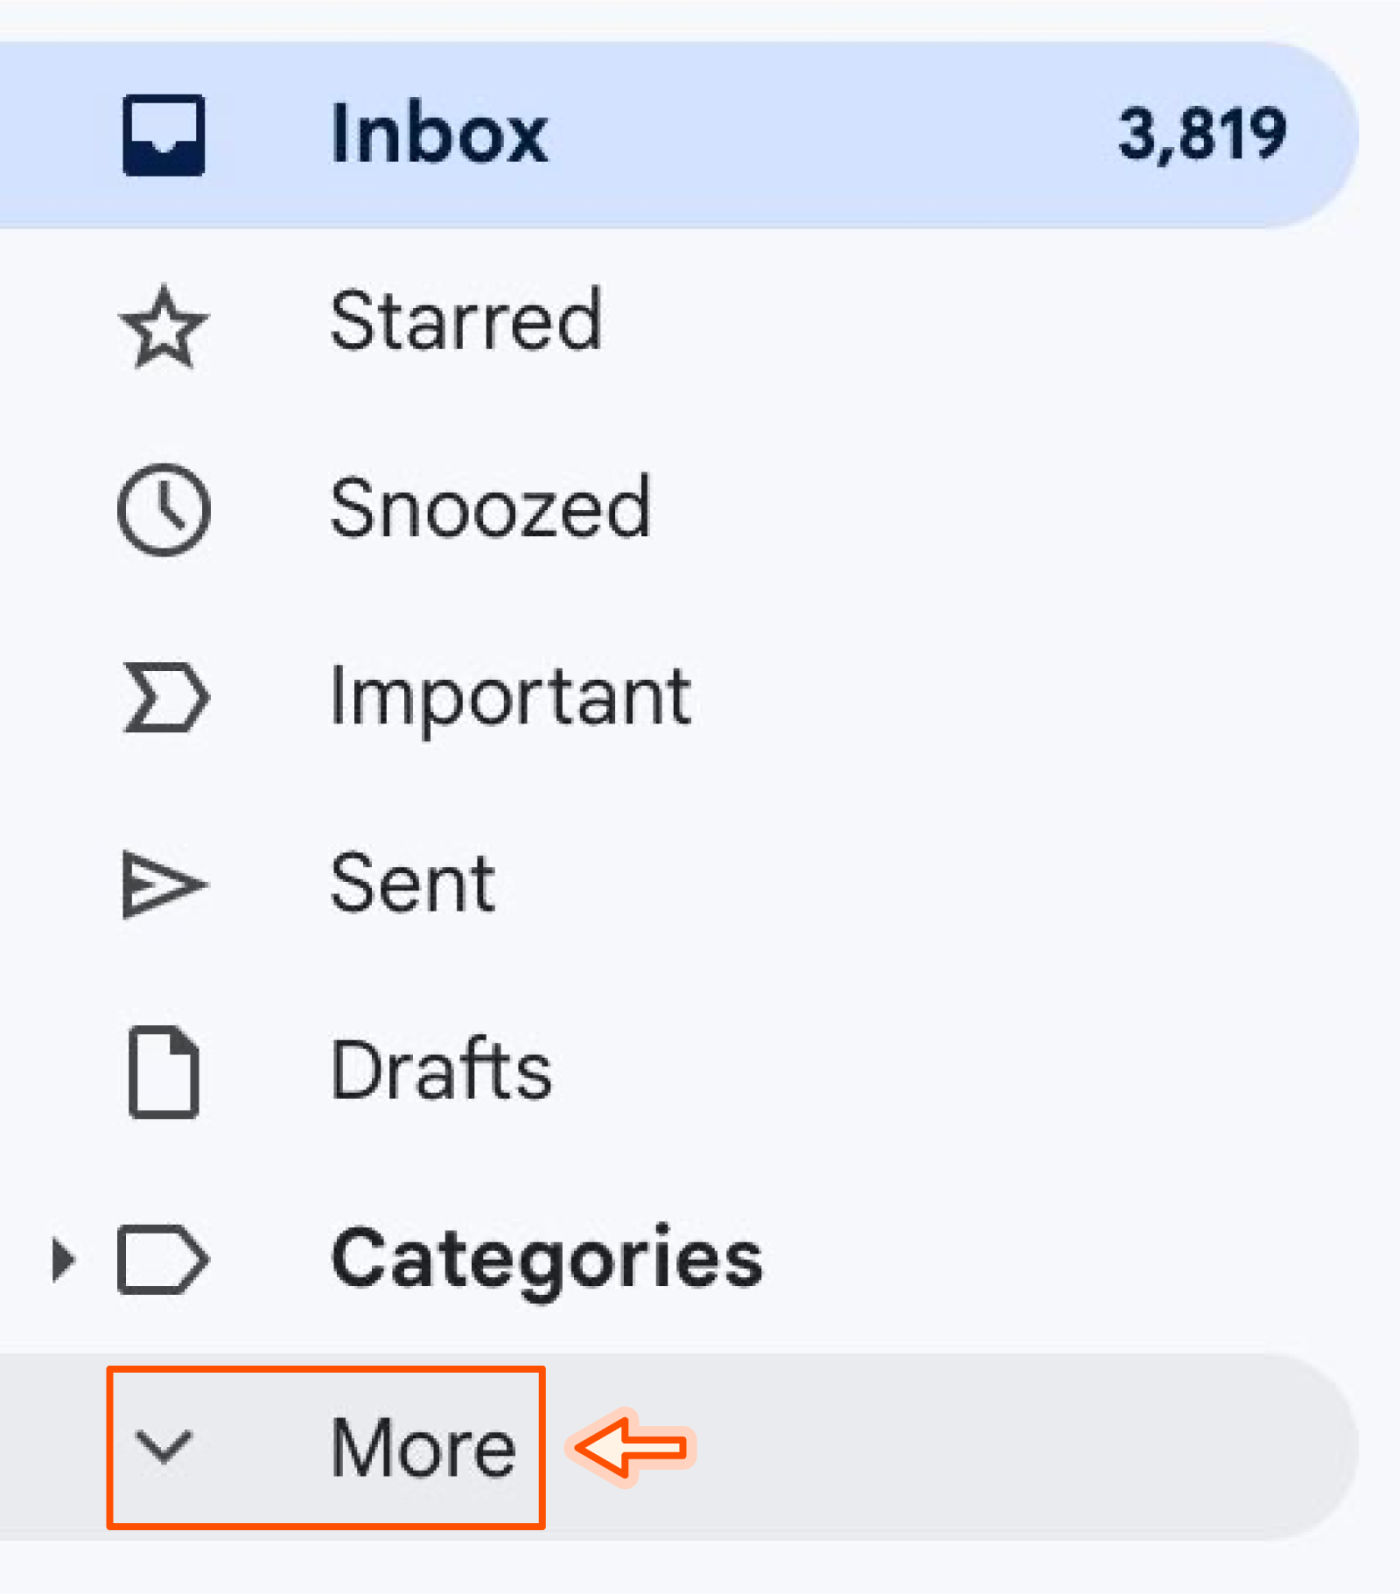 Screenshot of more button on Gmail.